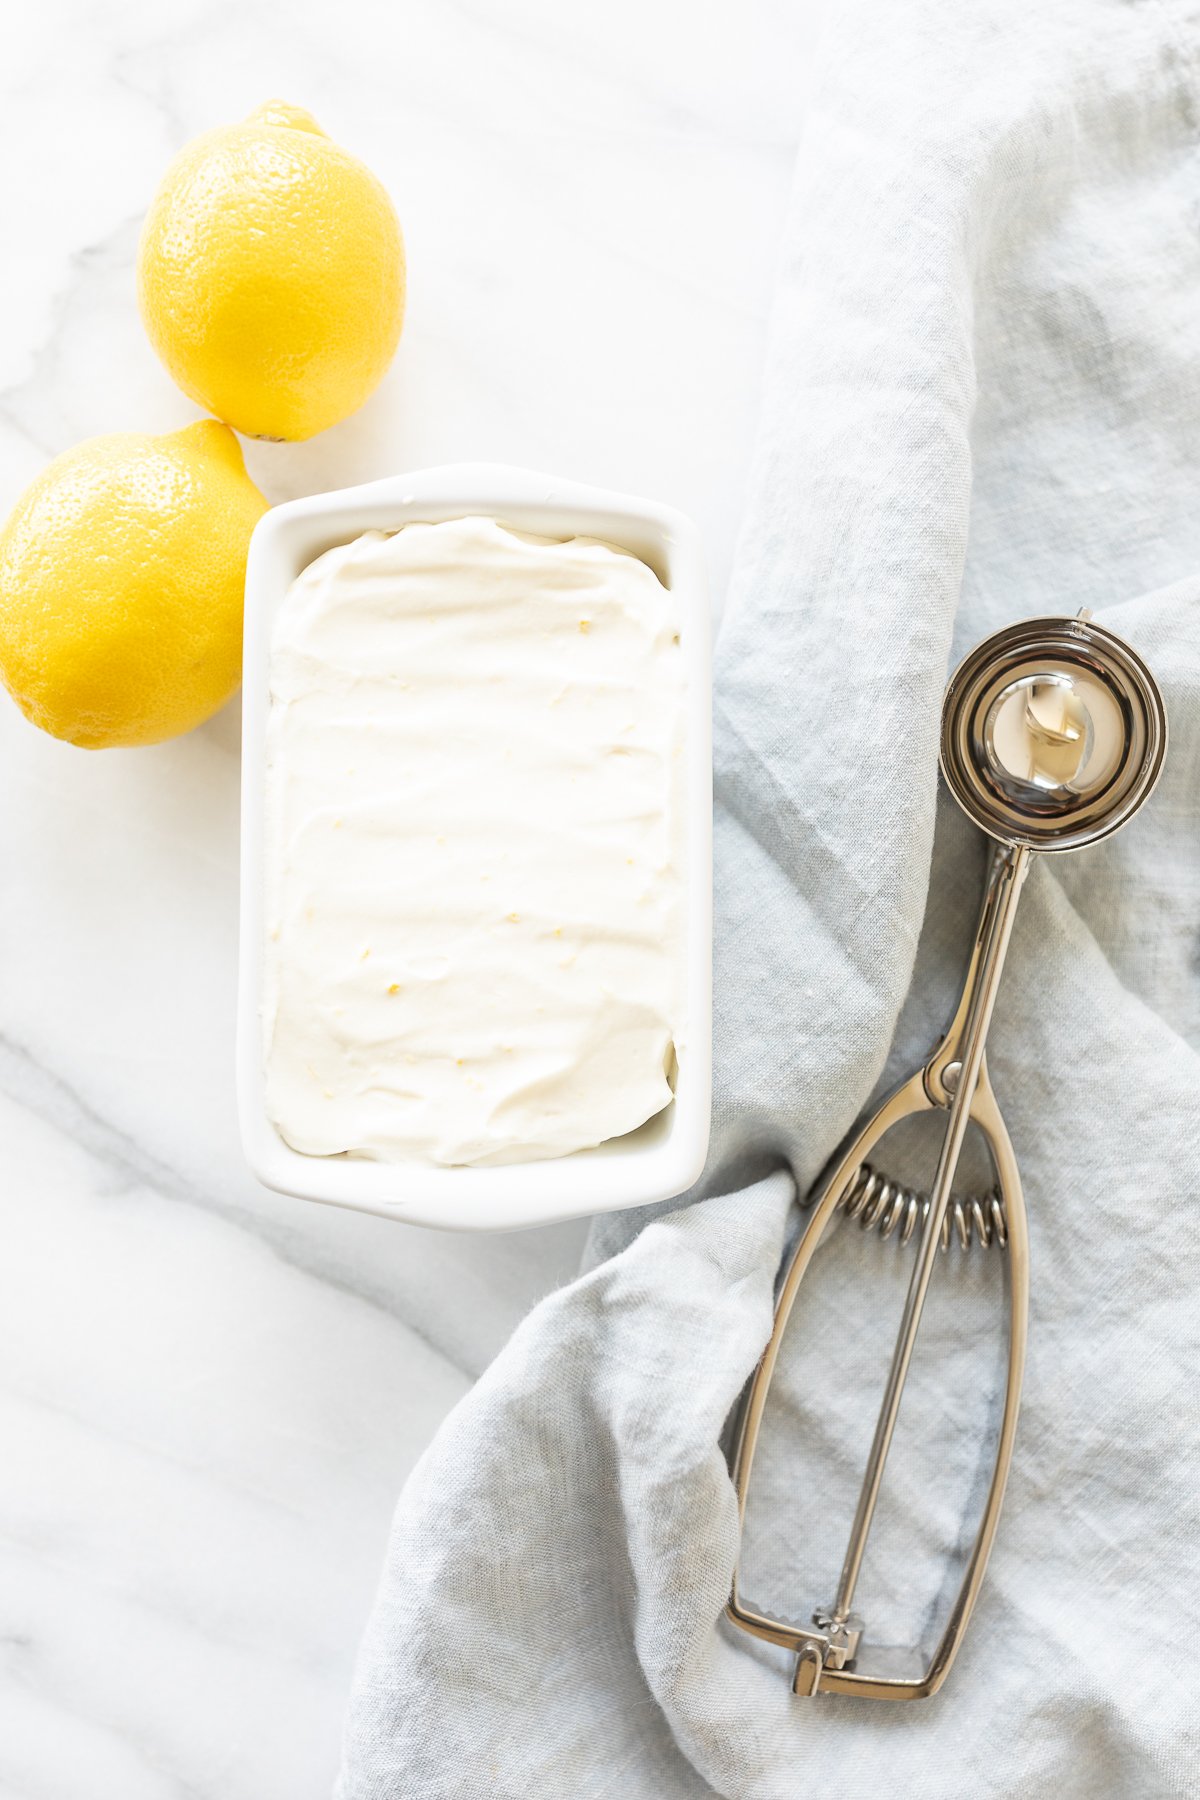 Lemon ice cream in a ceramic mini loaf pan, with fresh lemons to the side.